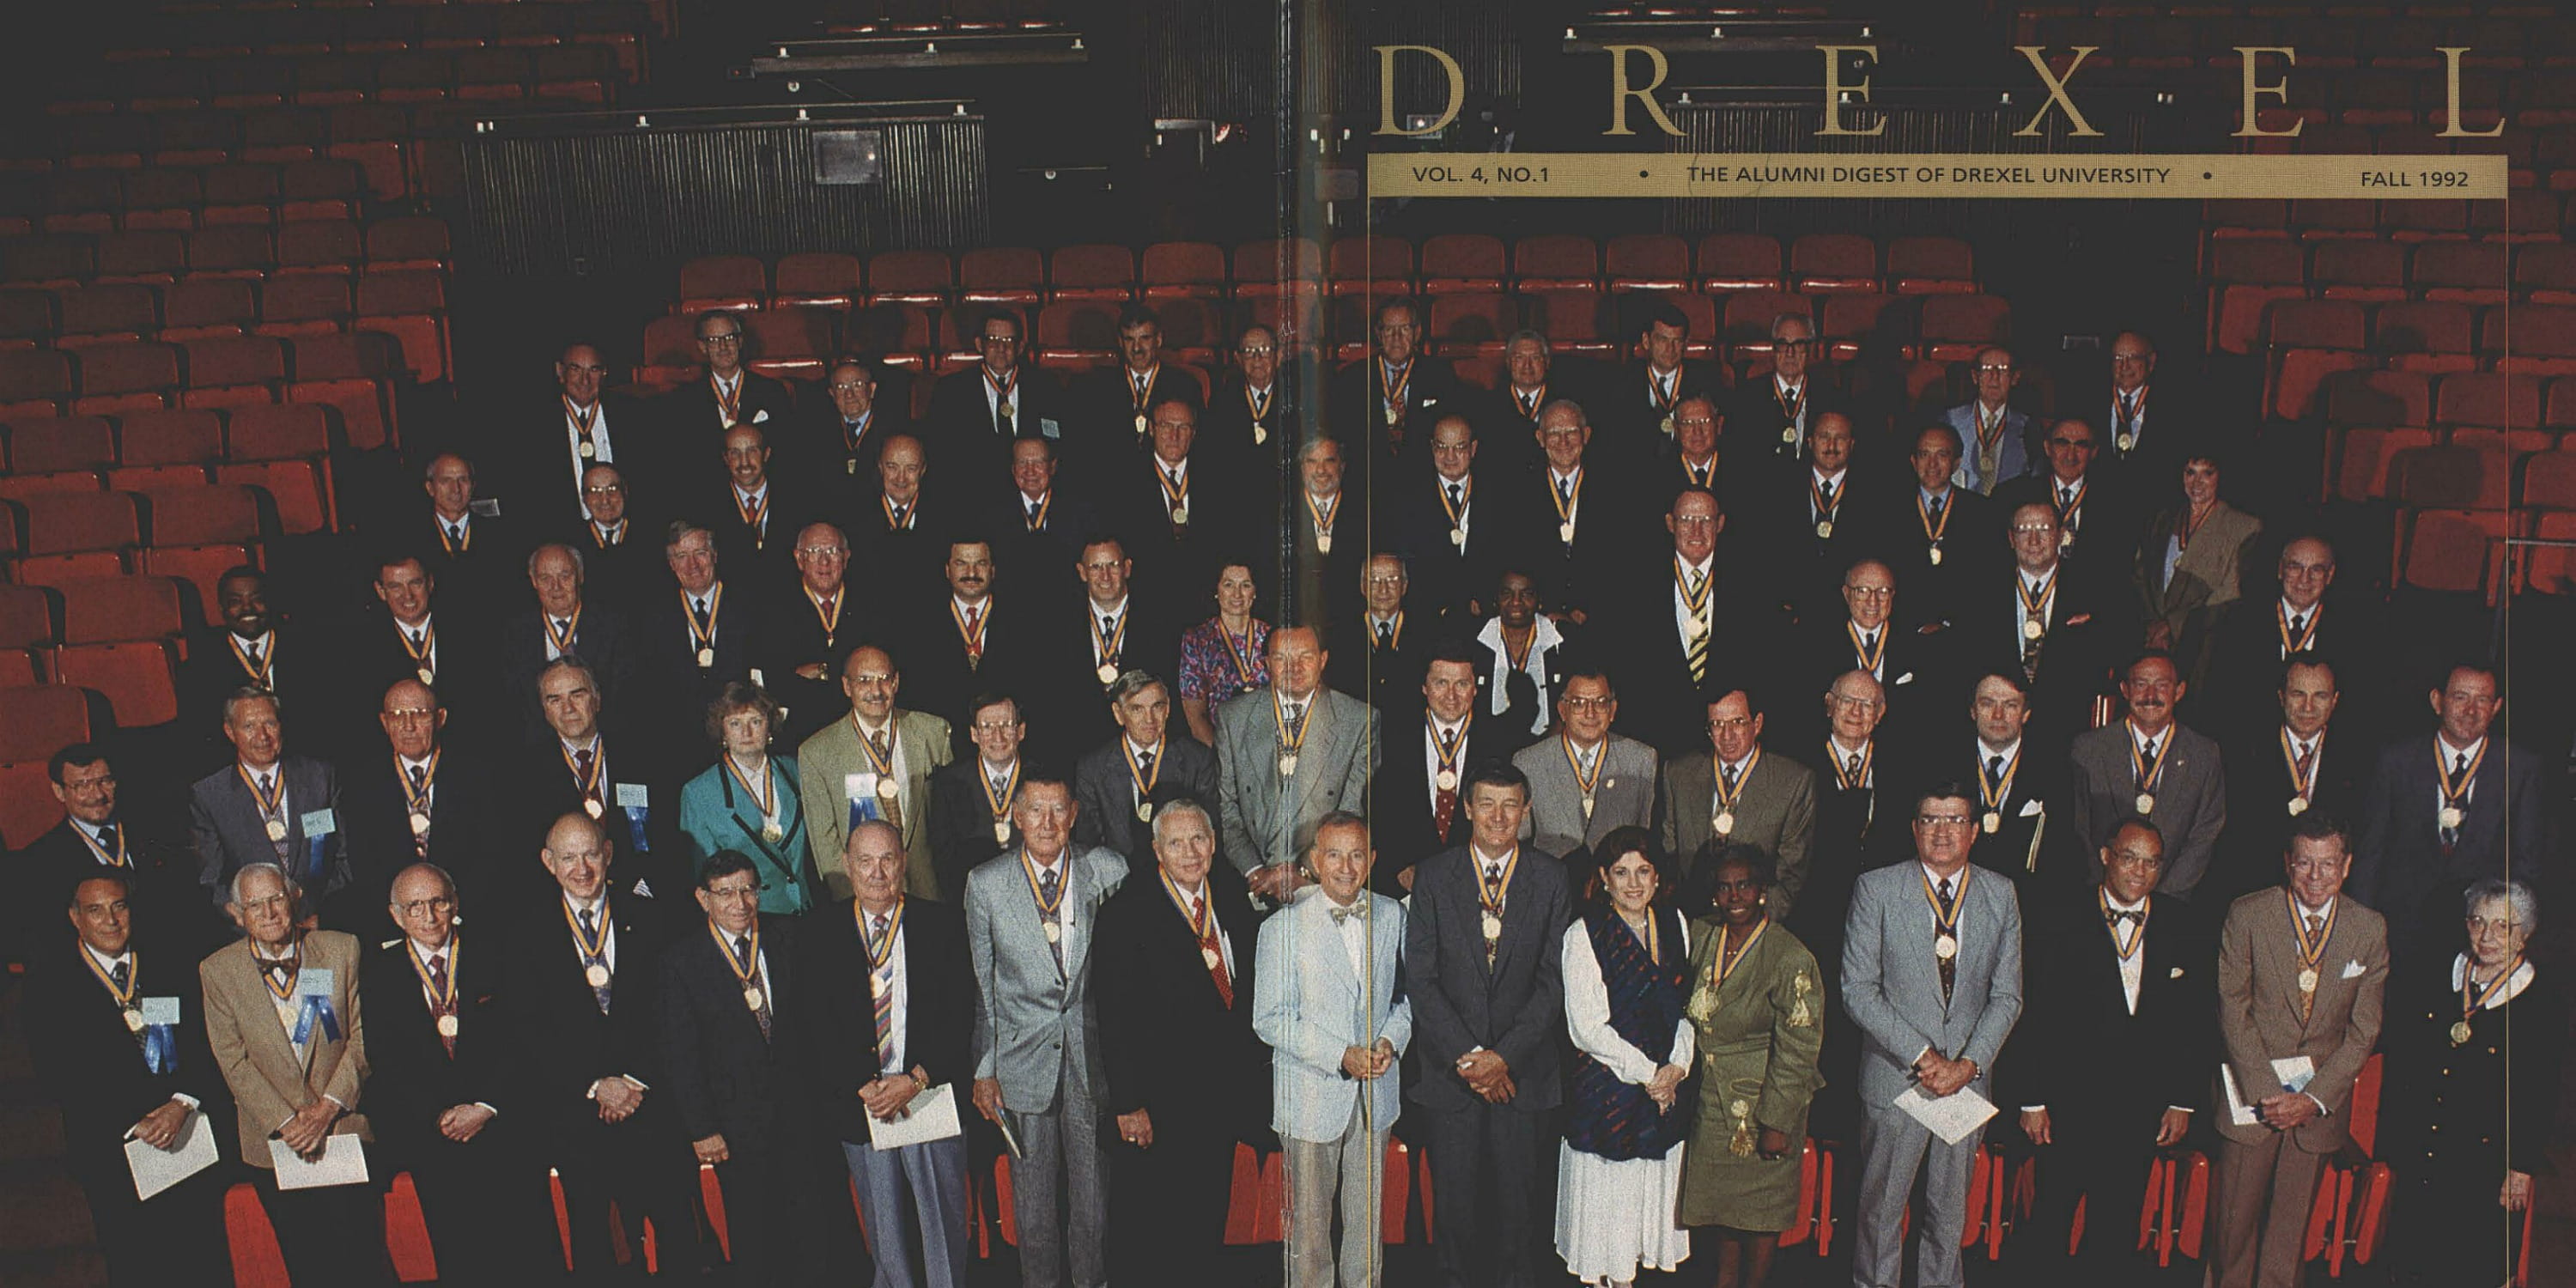 A composite of the front and back covers of the fall 1992 issue of Drexel’s alumni magazine featuring the inaugural class of the Drexel 100 (with President Richard Breslin in the pale blue coat in the center of the bottom row). Magazine scan courtesy University Archives.